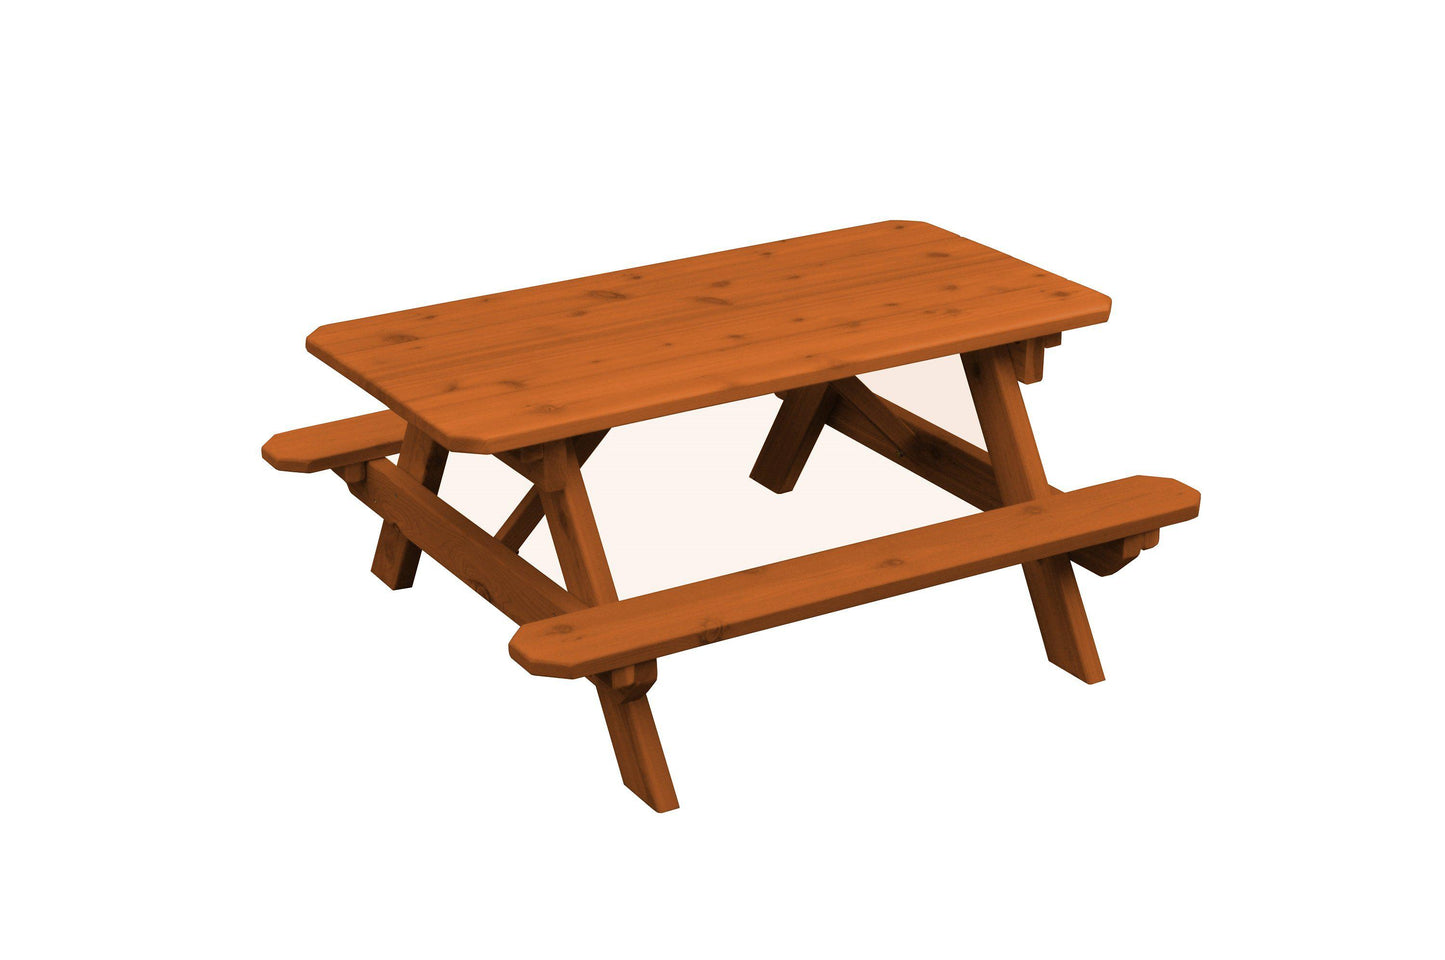 A&L FURNITURE CO. Western Red Cedar Kid's Table (22" Wide)- Specify for FREE 2" Umbrella Hole - LEAD TIME TO SHIP 2 WEEKS